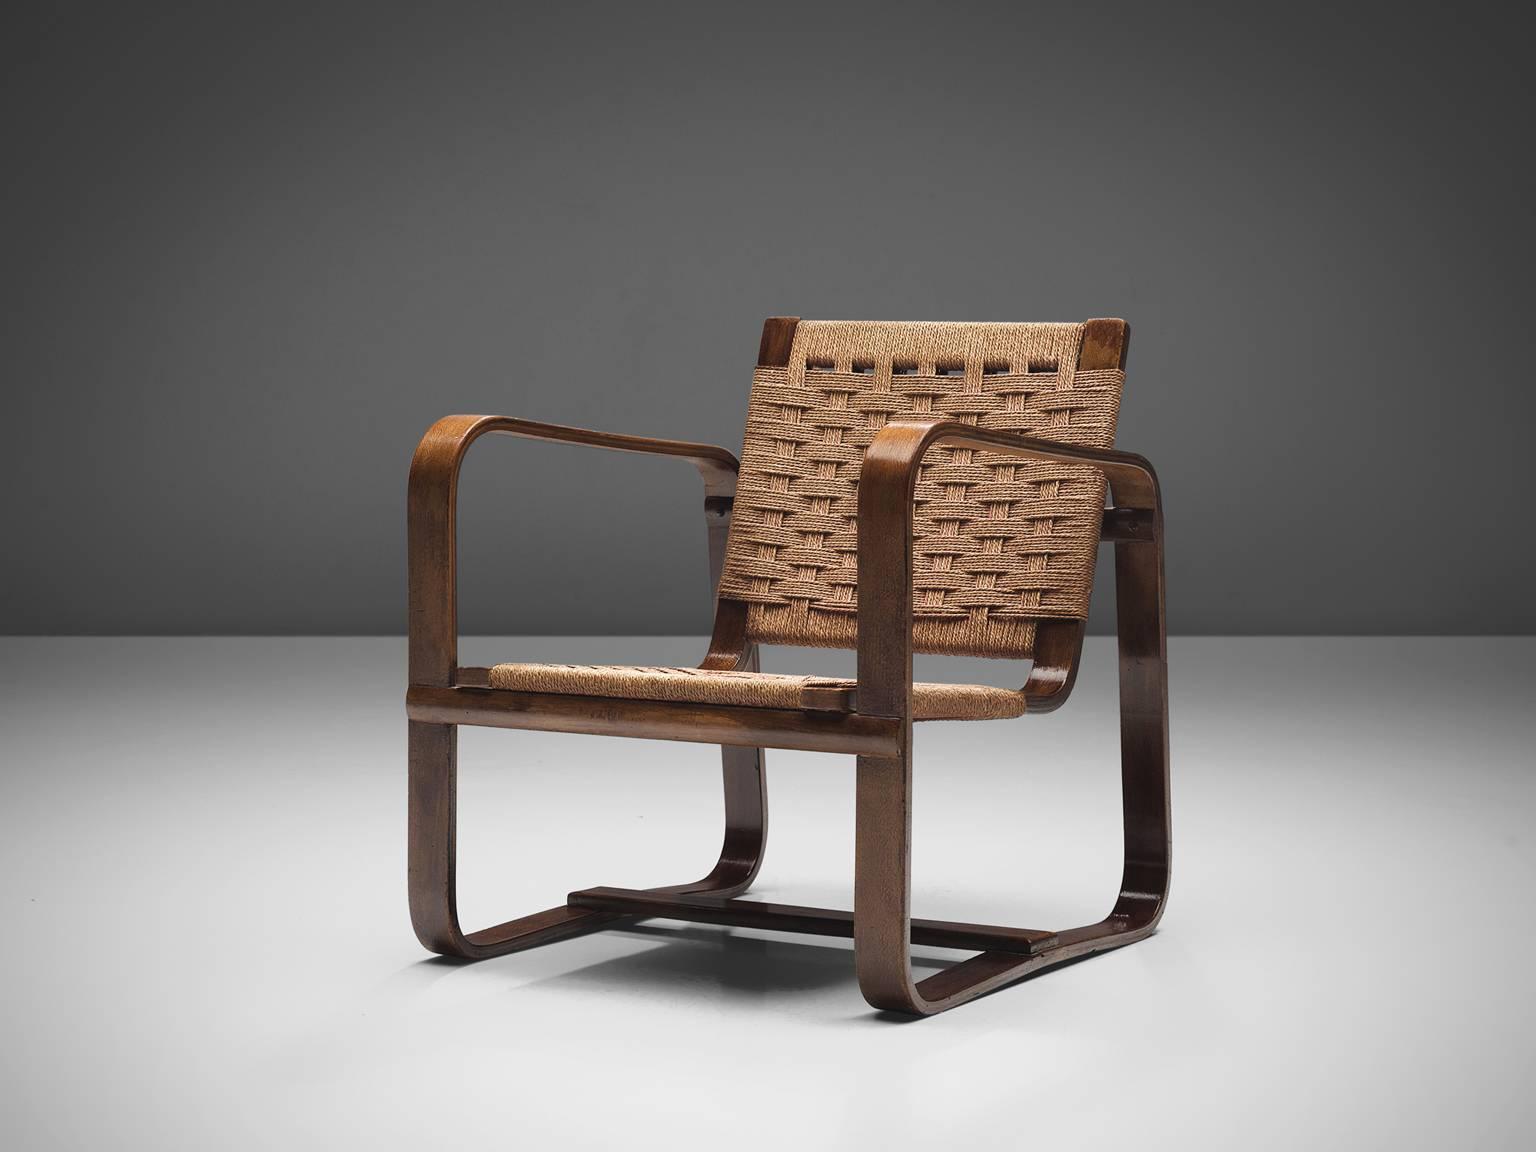 Giuseppe Pagano Pogatshnig, armchair, beech rope weave, Italy, 1942. 

This comfortable armchair made with layers of plywood has a boxy look has curved armrests. The design of this set of chairs and ottomans is Minimalist yet not in a Puritan way.